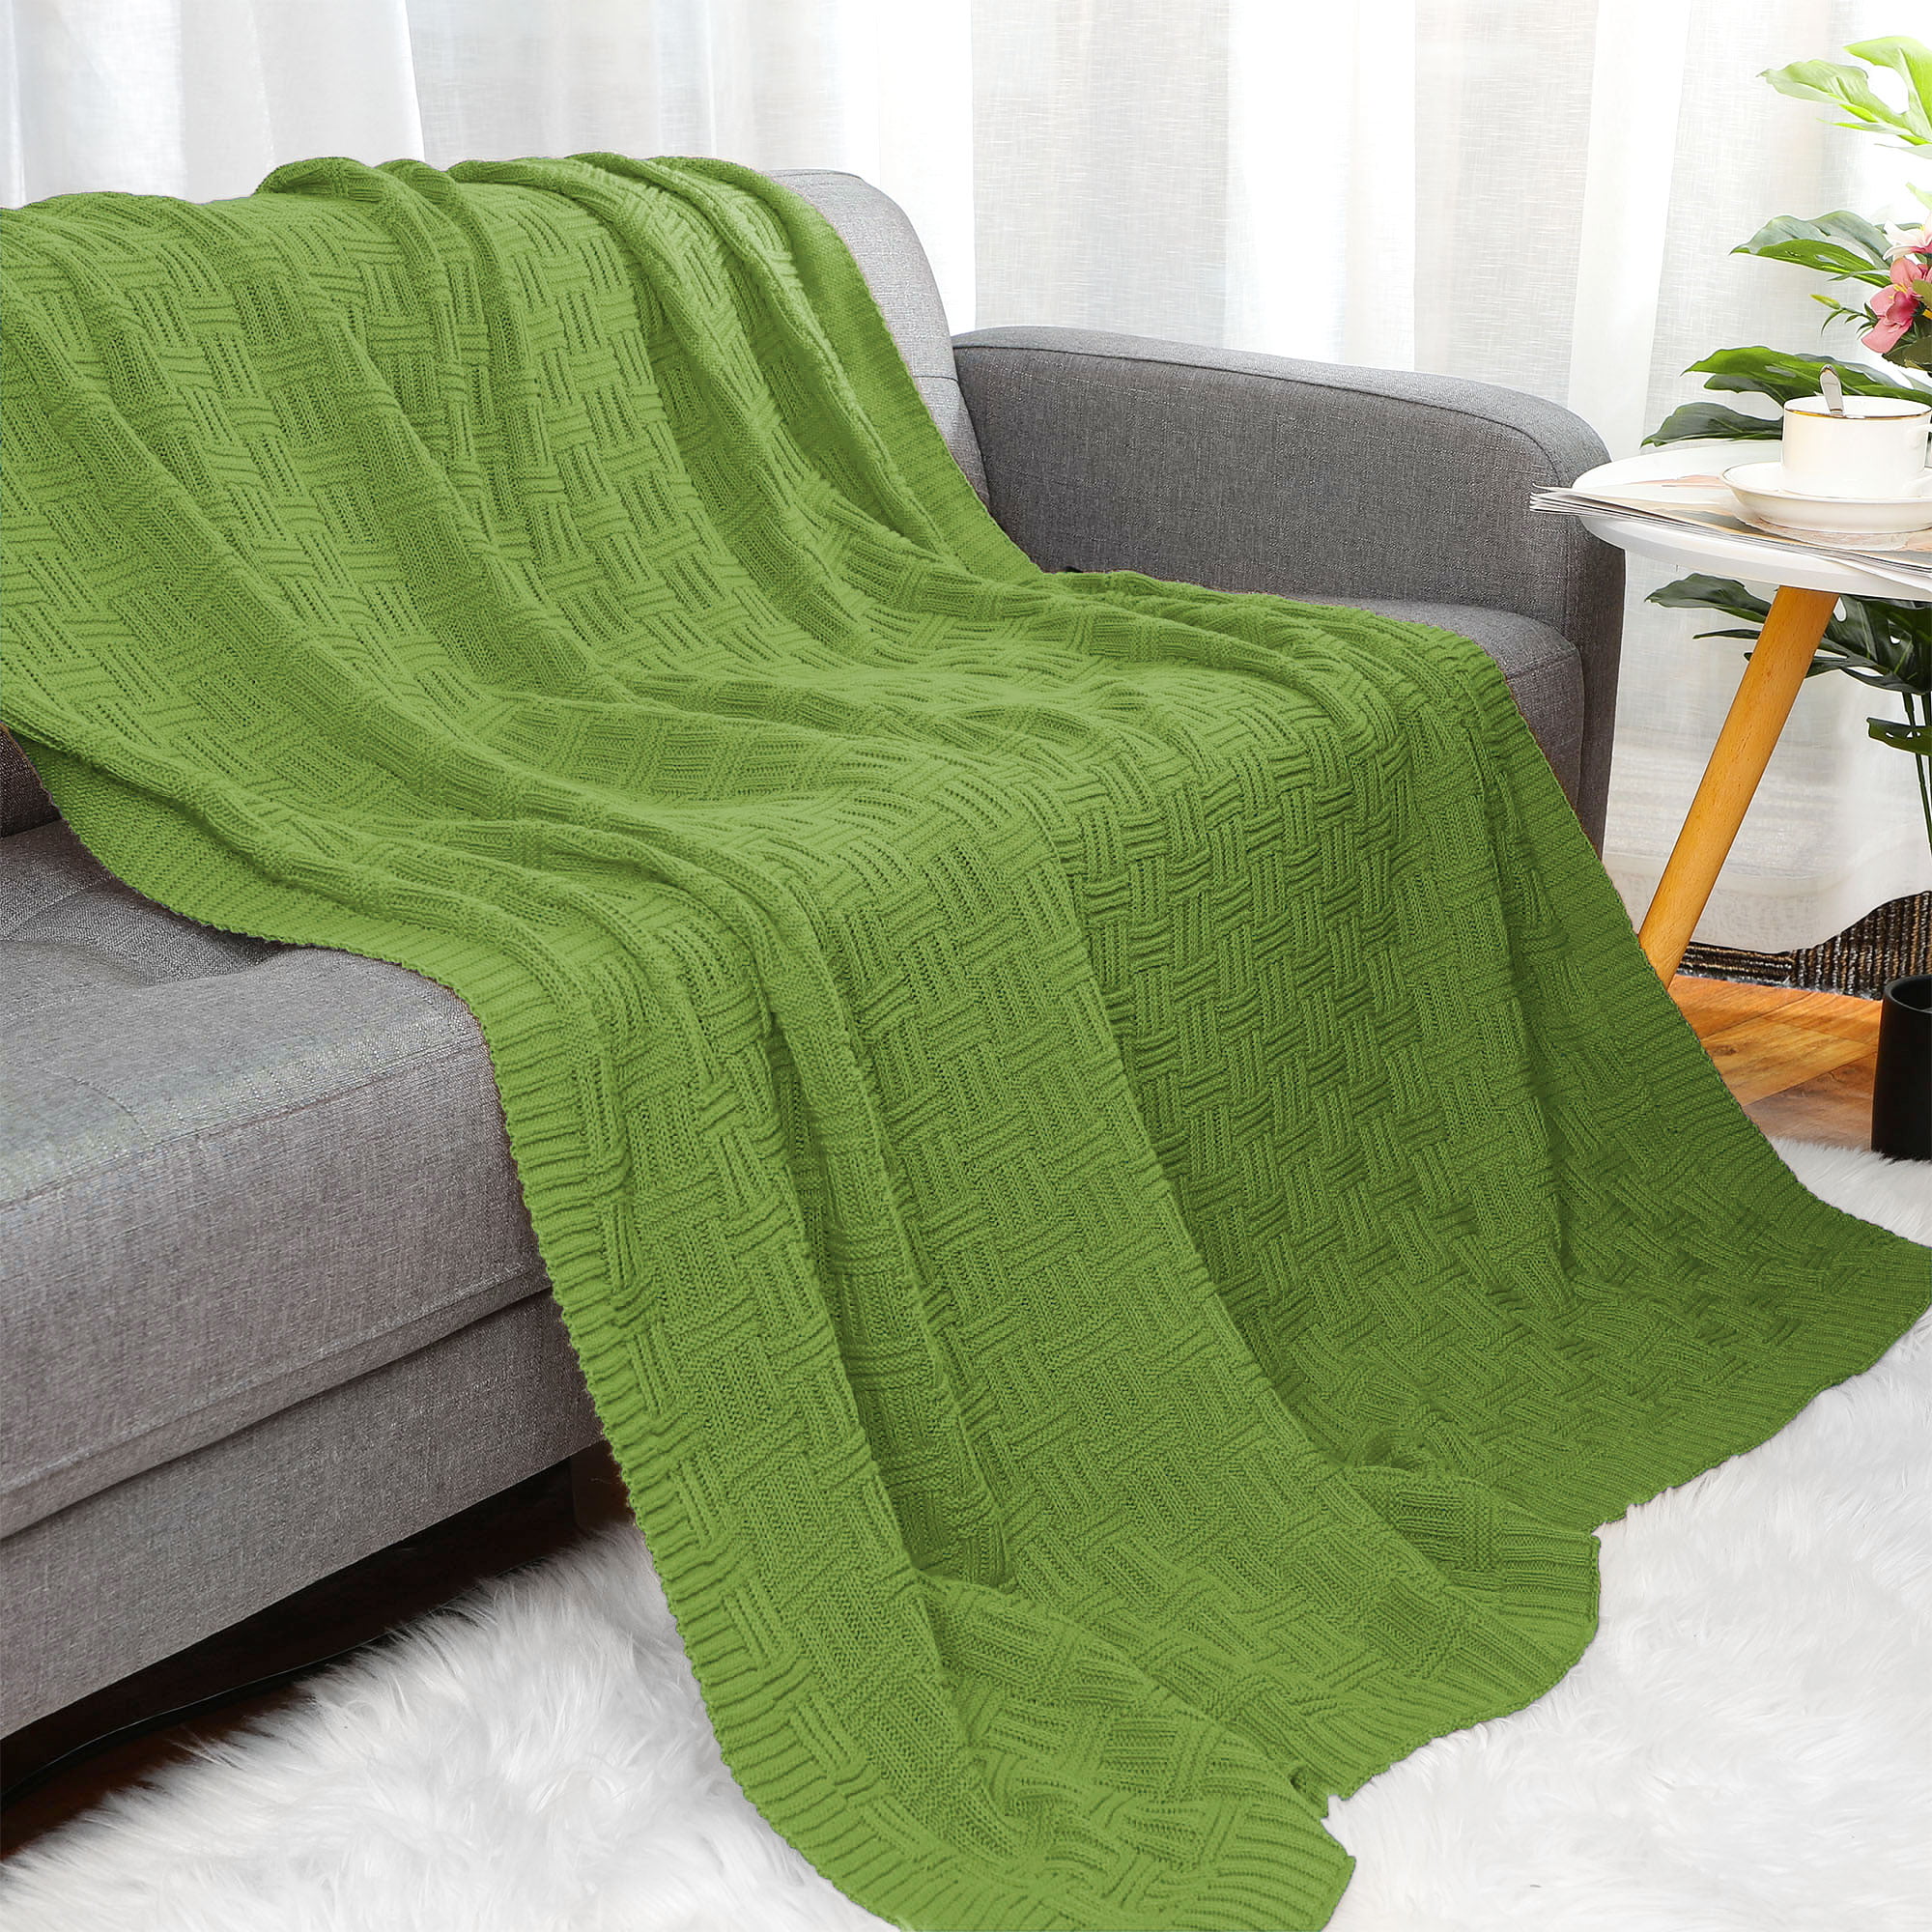 100% Cotton Cross Cable Knit Throw Blanket For Sofa Couch Bed Home ...